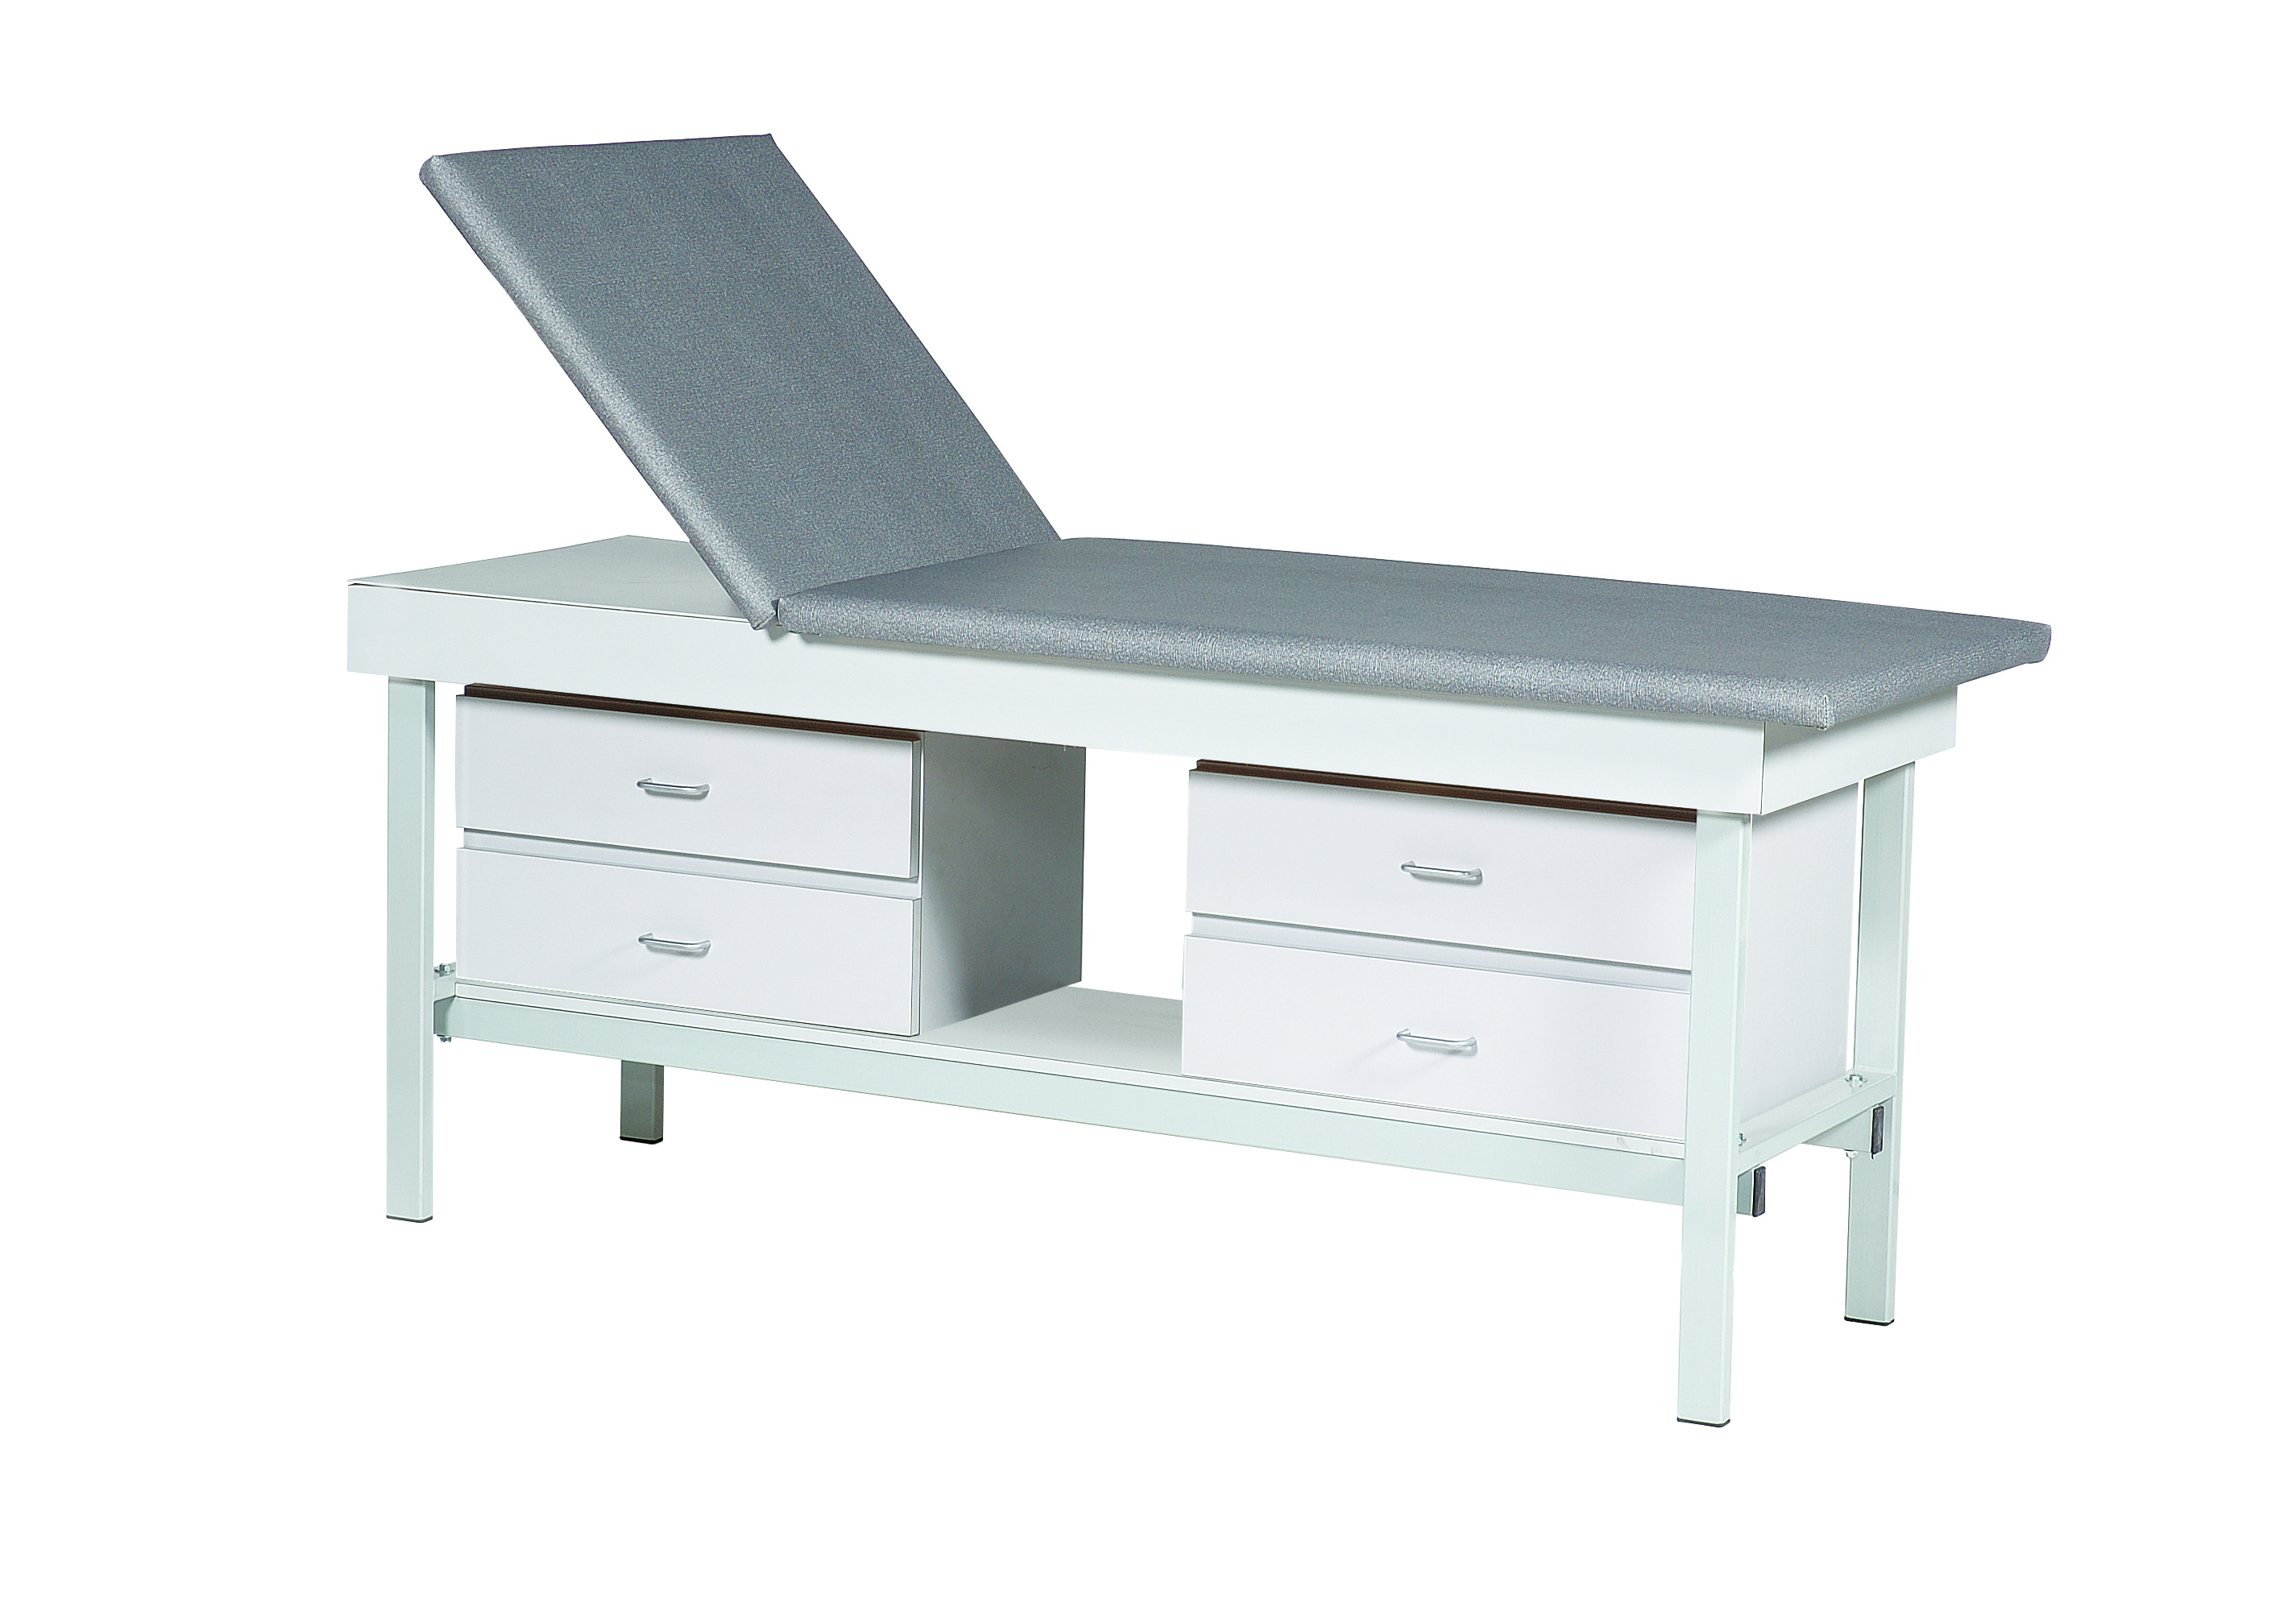 Adjustable Back Exam Table with 4 Drawers 